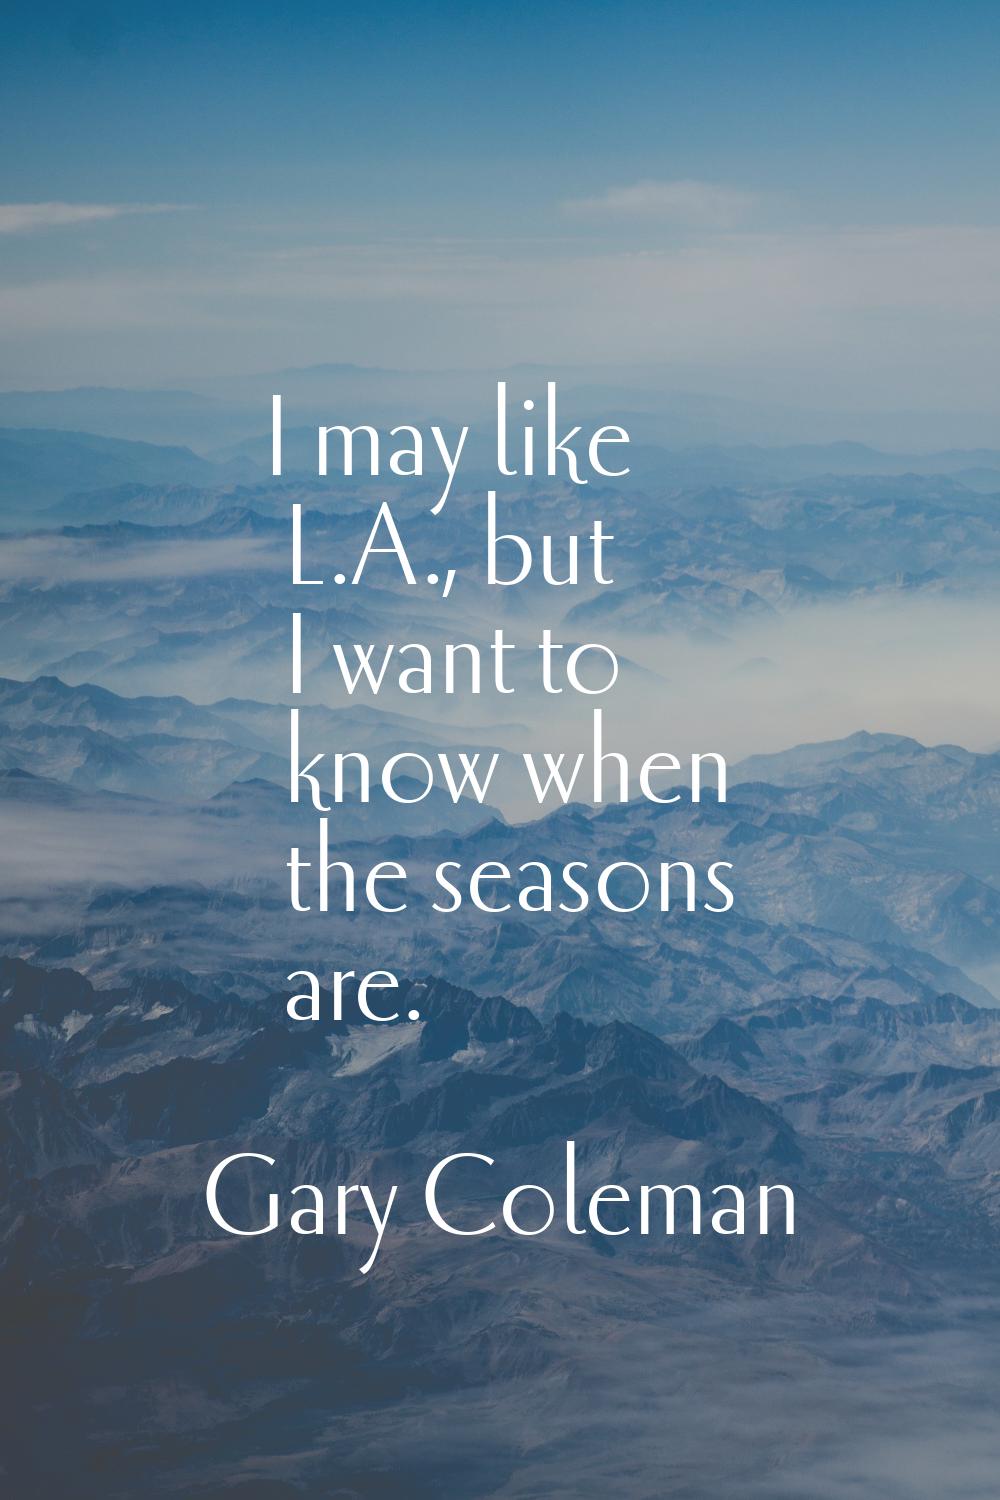 I may like L.A., but I want to know when the seasons are.